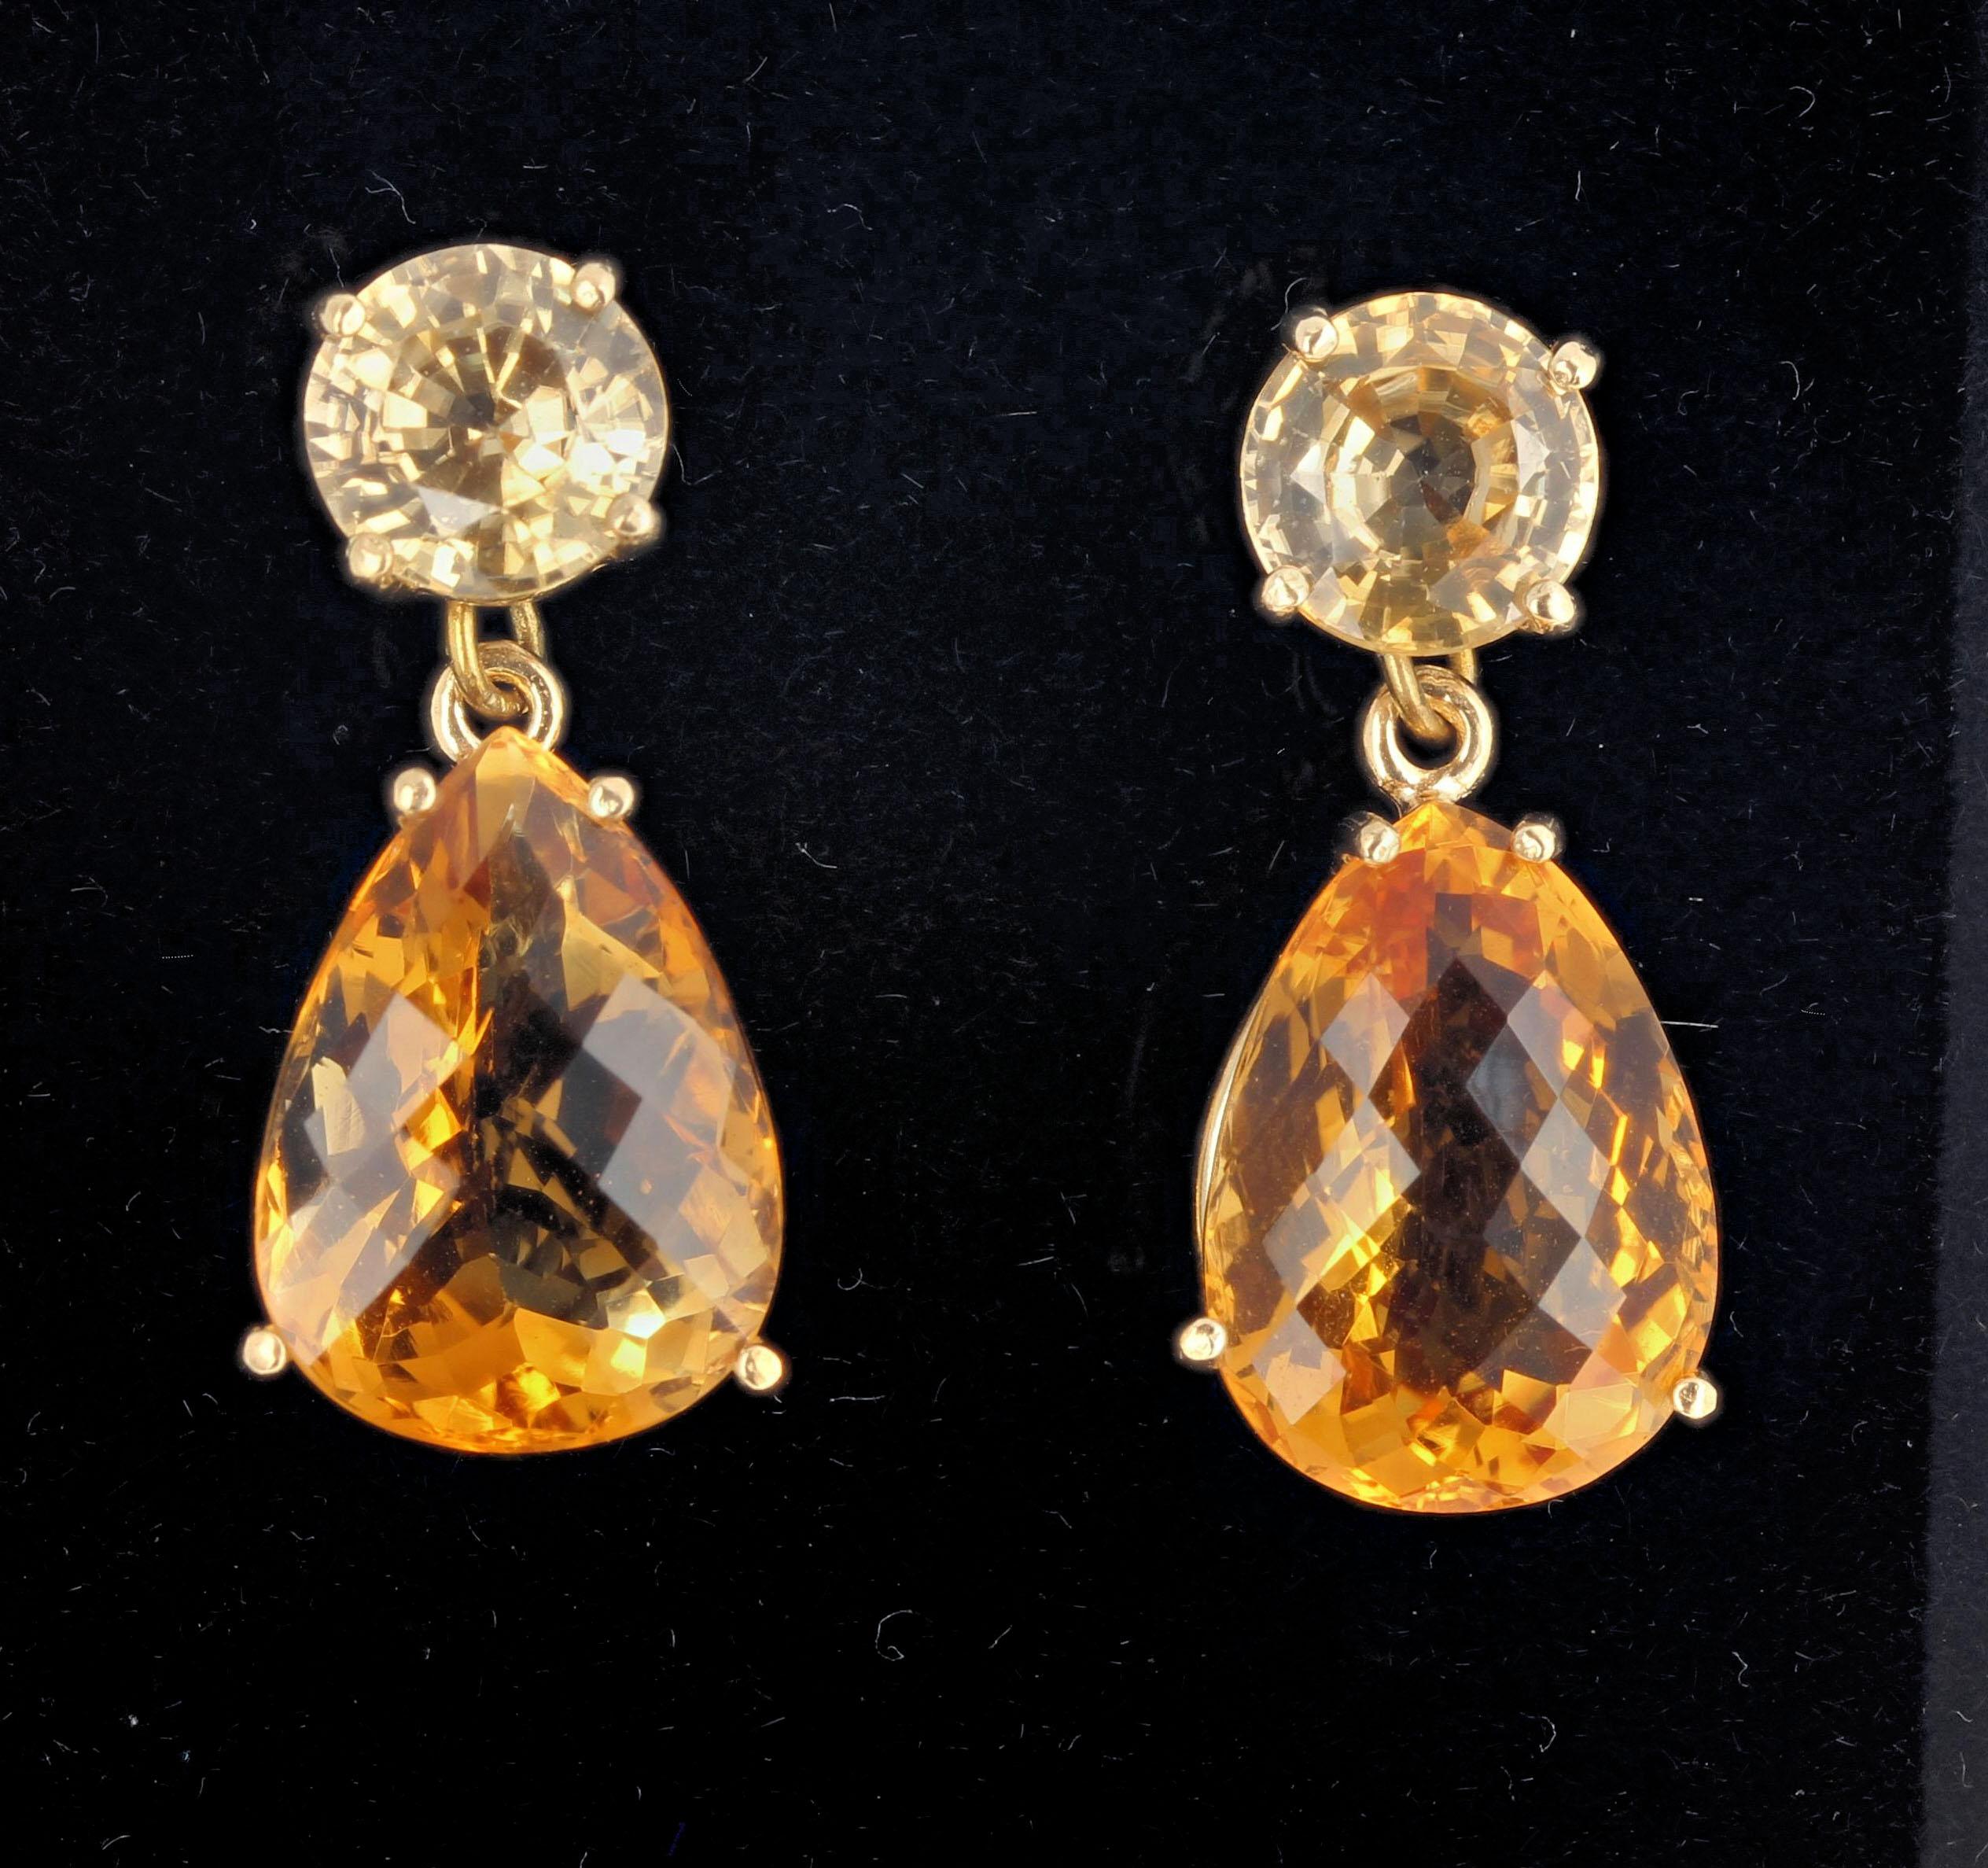 These 15.35 carats of real Citrines dangle elegantly from RARE glittering yellow 5.2 carats of natural real Cambodian Zircons set in 10Kt yellow gold stud earrings that hang approximately 1.1 inches long. These are superbly elegant for dinner and